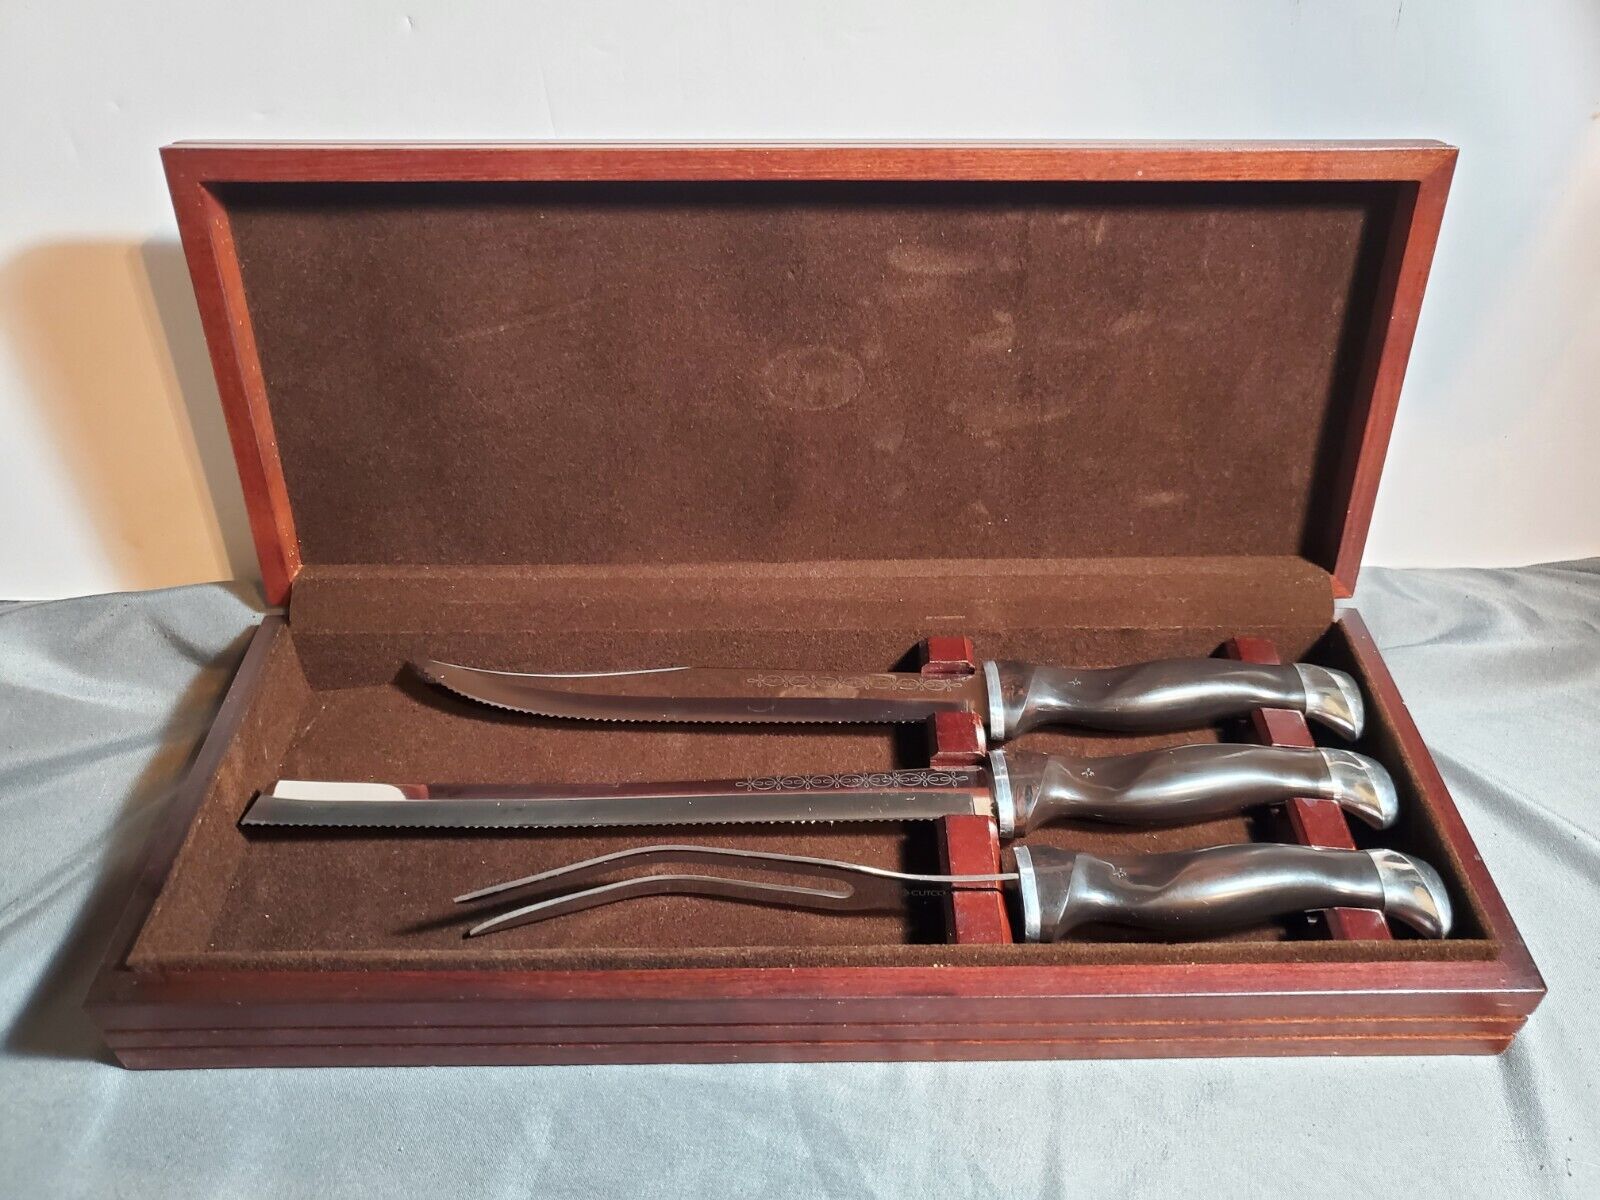 Vintage Cutco 3 Piece Carving Knives Set Cherry Wood Chest Items 1731 1732 1733